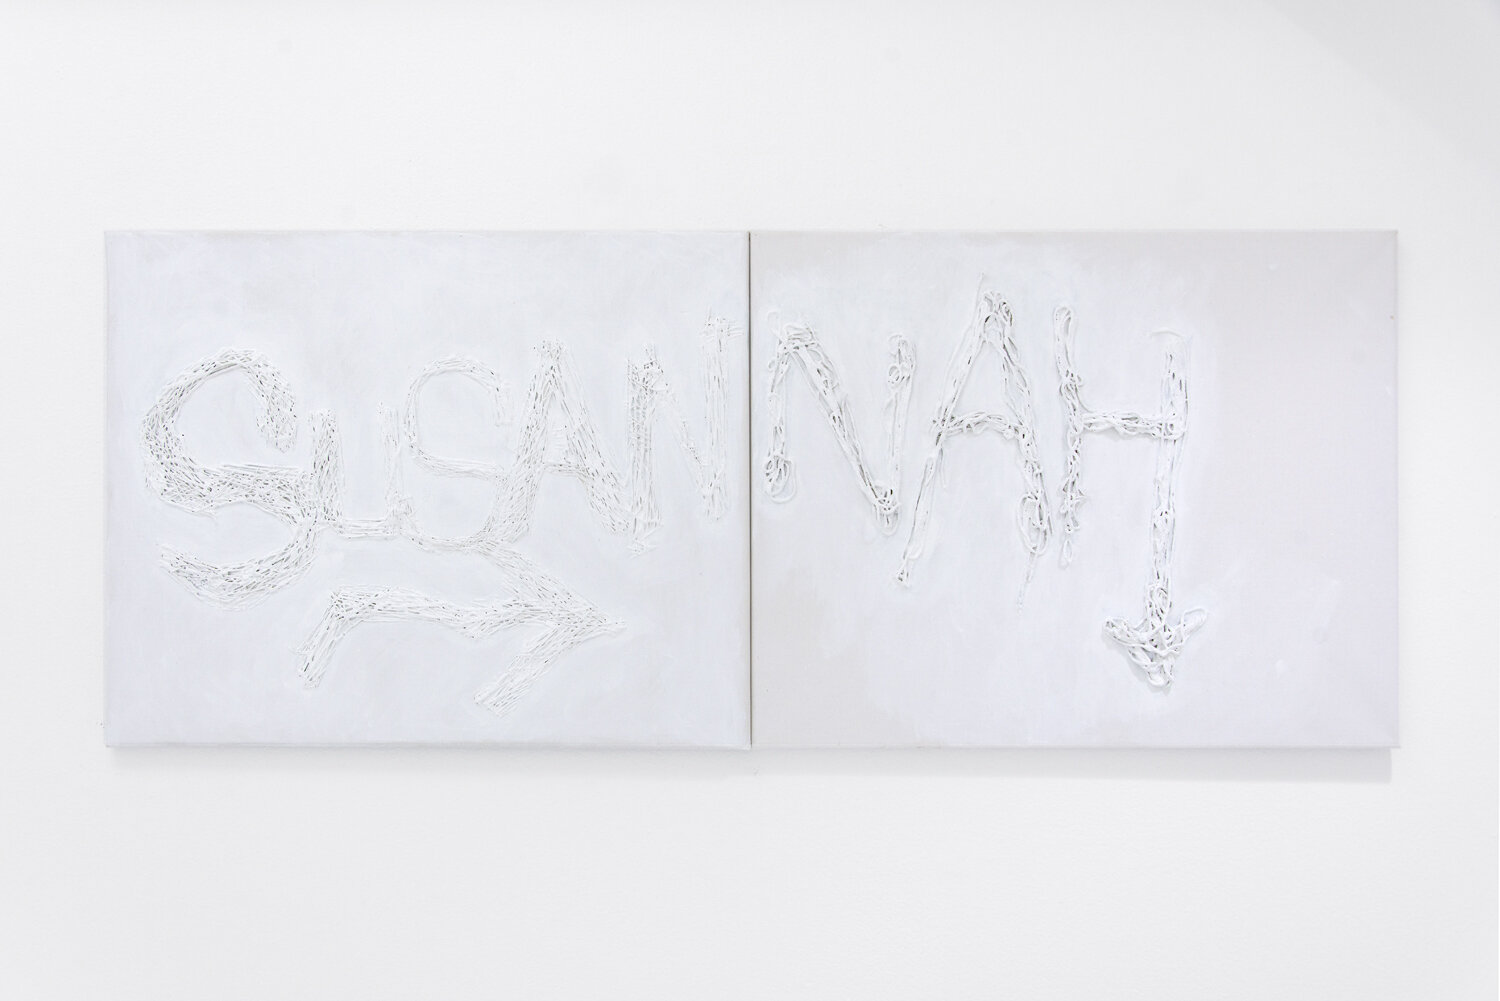   The Susan Sign , 2019, Cotton and acrylic paint on canvas, 40 x 16 in (2 canvases at 20 x 16 in)  